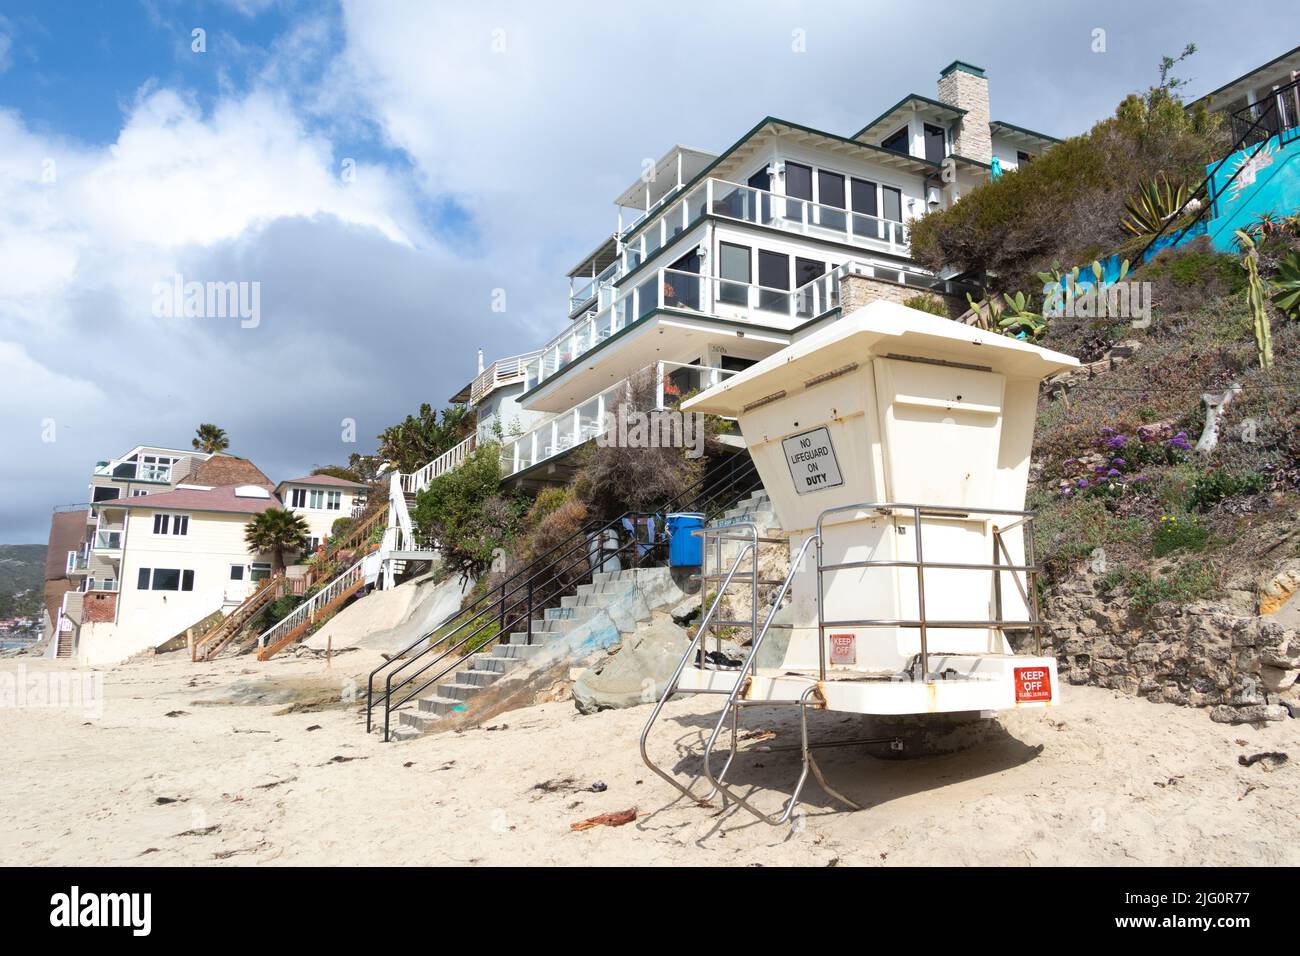 iconic lifeguard hut on beach in front of sea front houses in Laguna beach Southern California USA Stock Photo